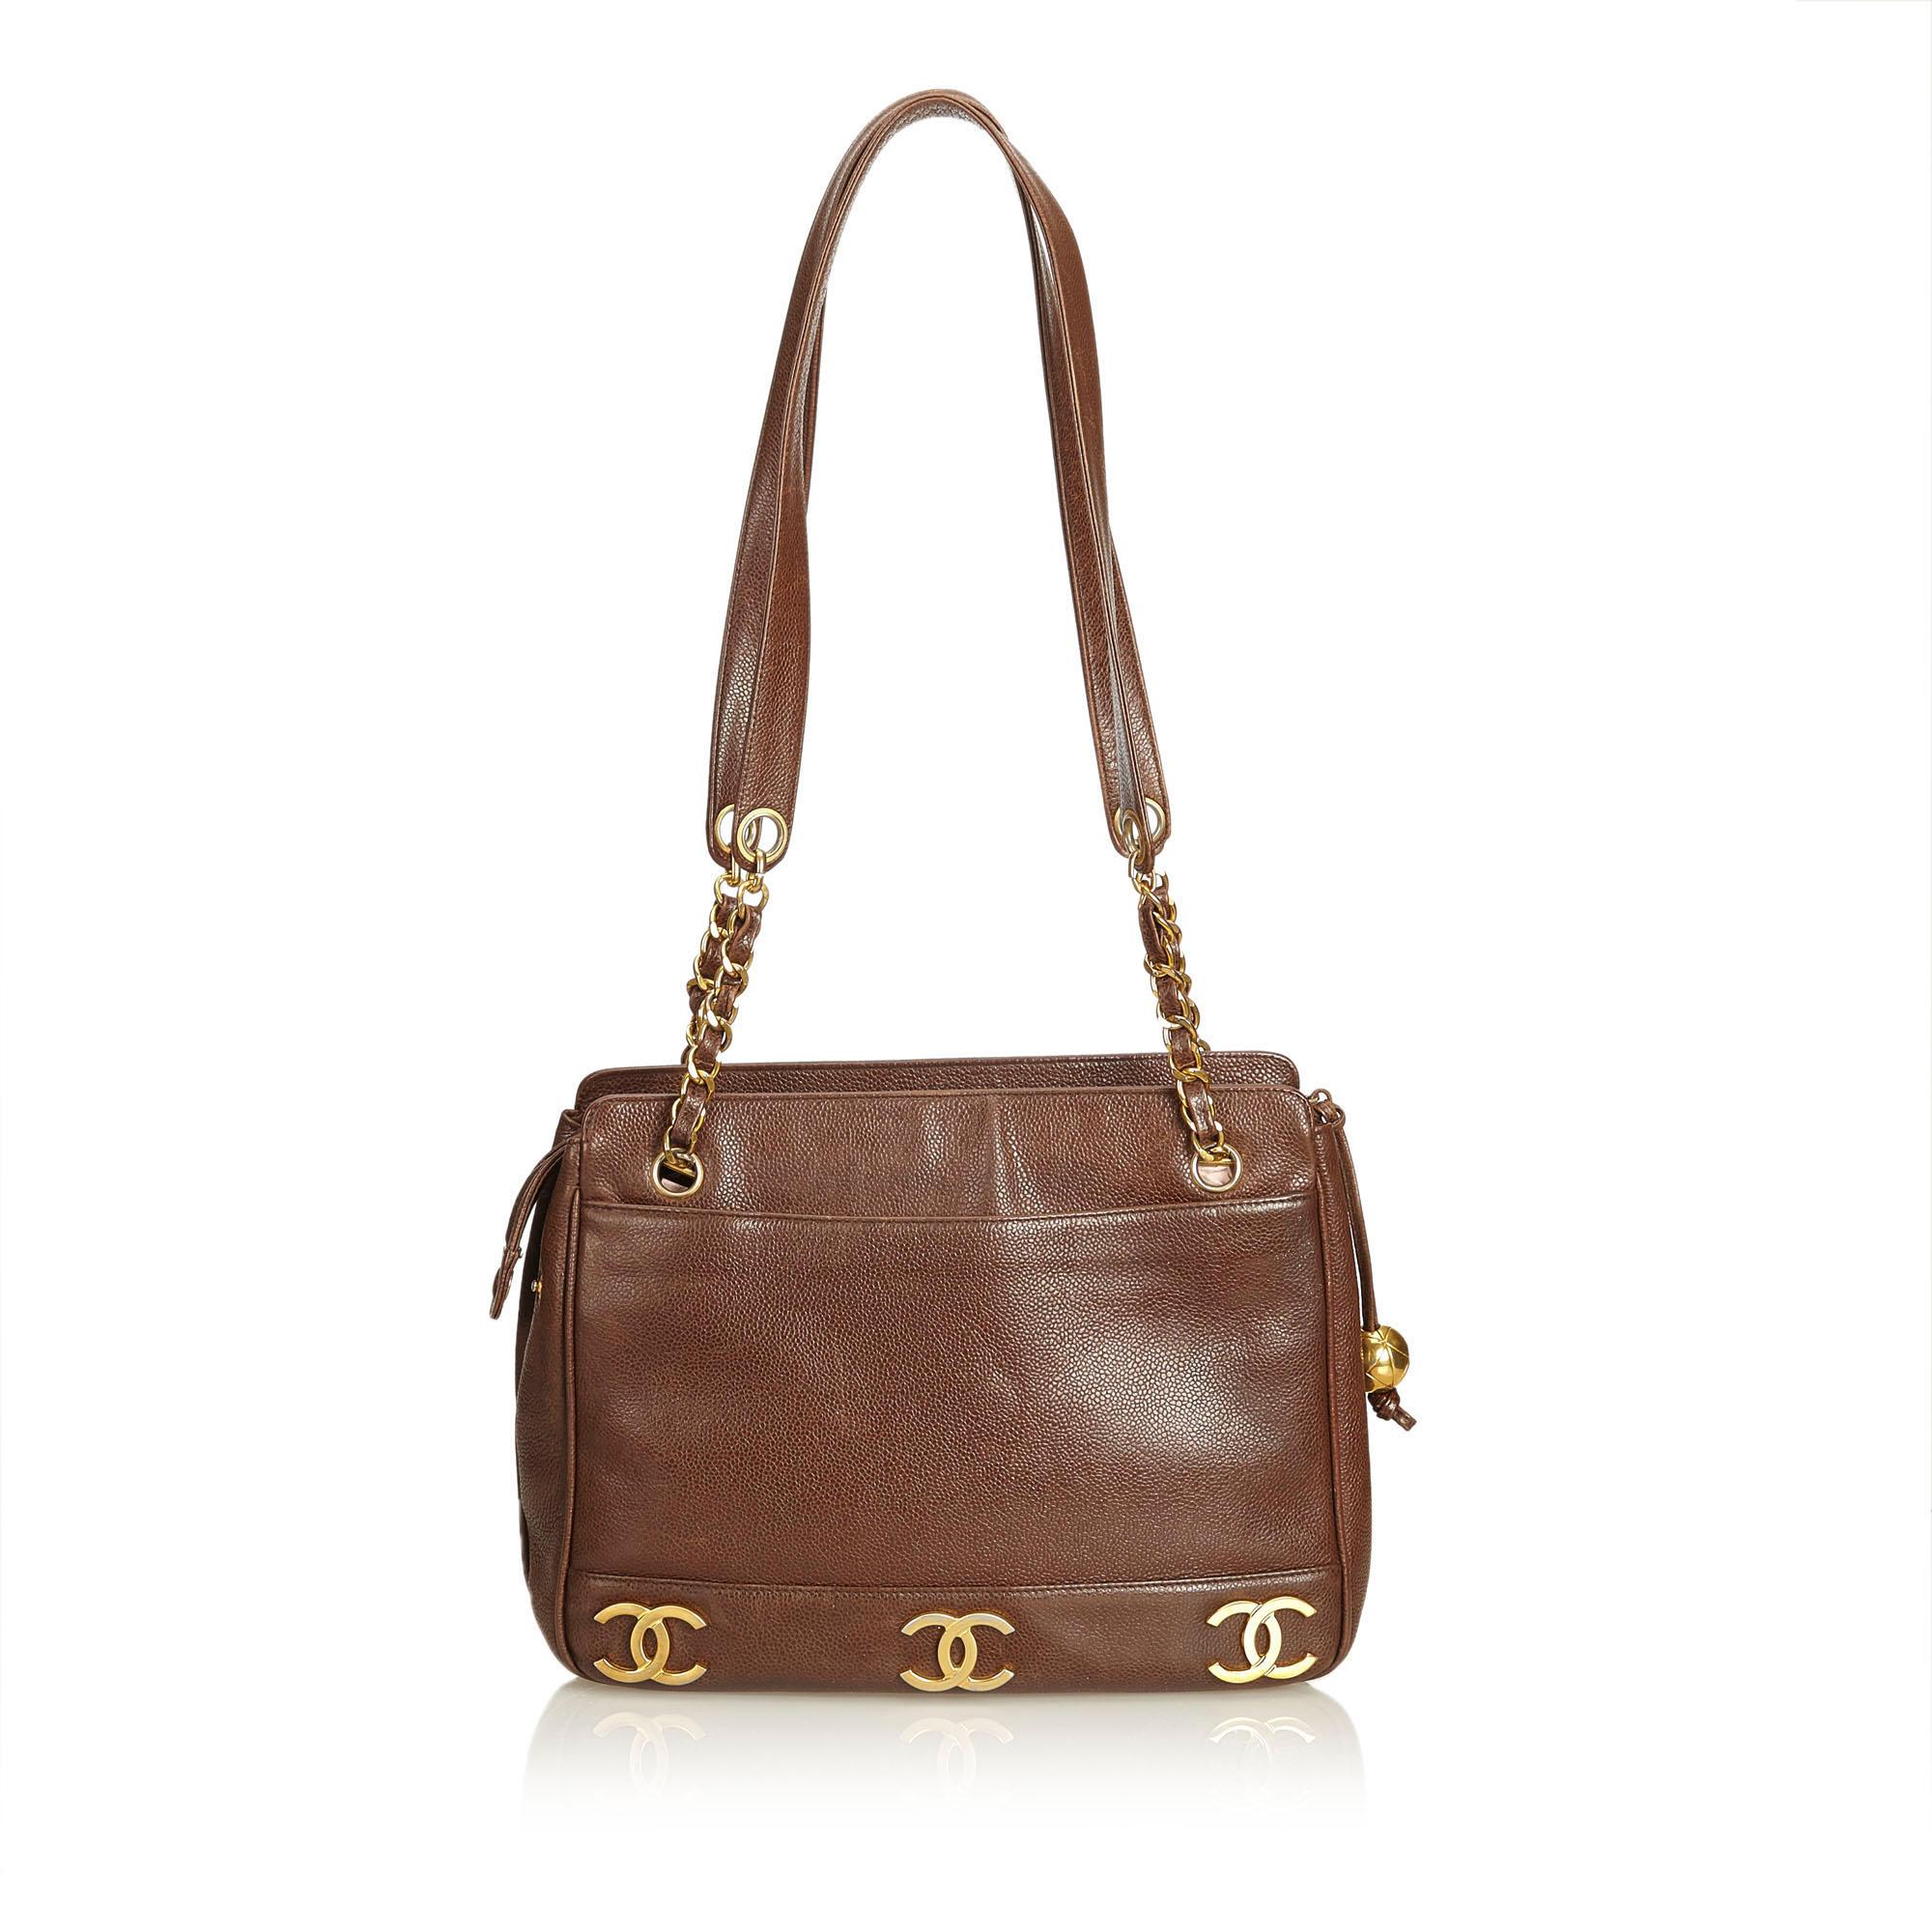 Chanel Brown x Dark Brown Leather Chain Shoulder Bag In Good Condition For Sale In Orlando, FL